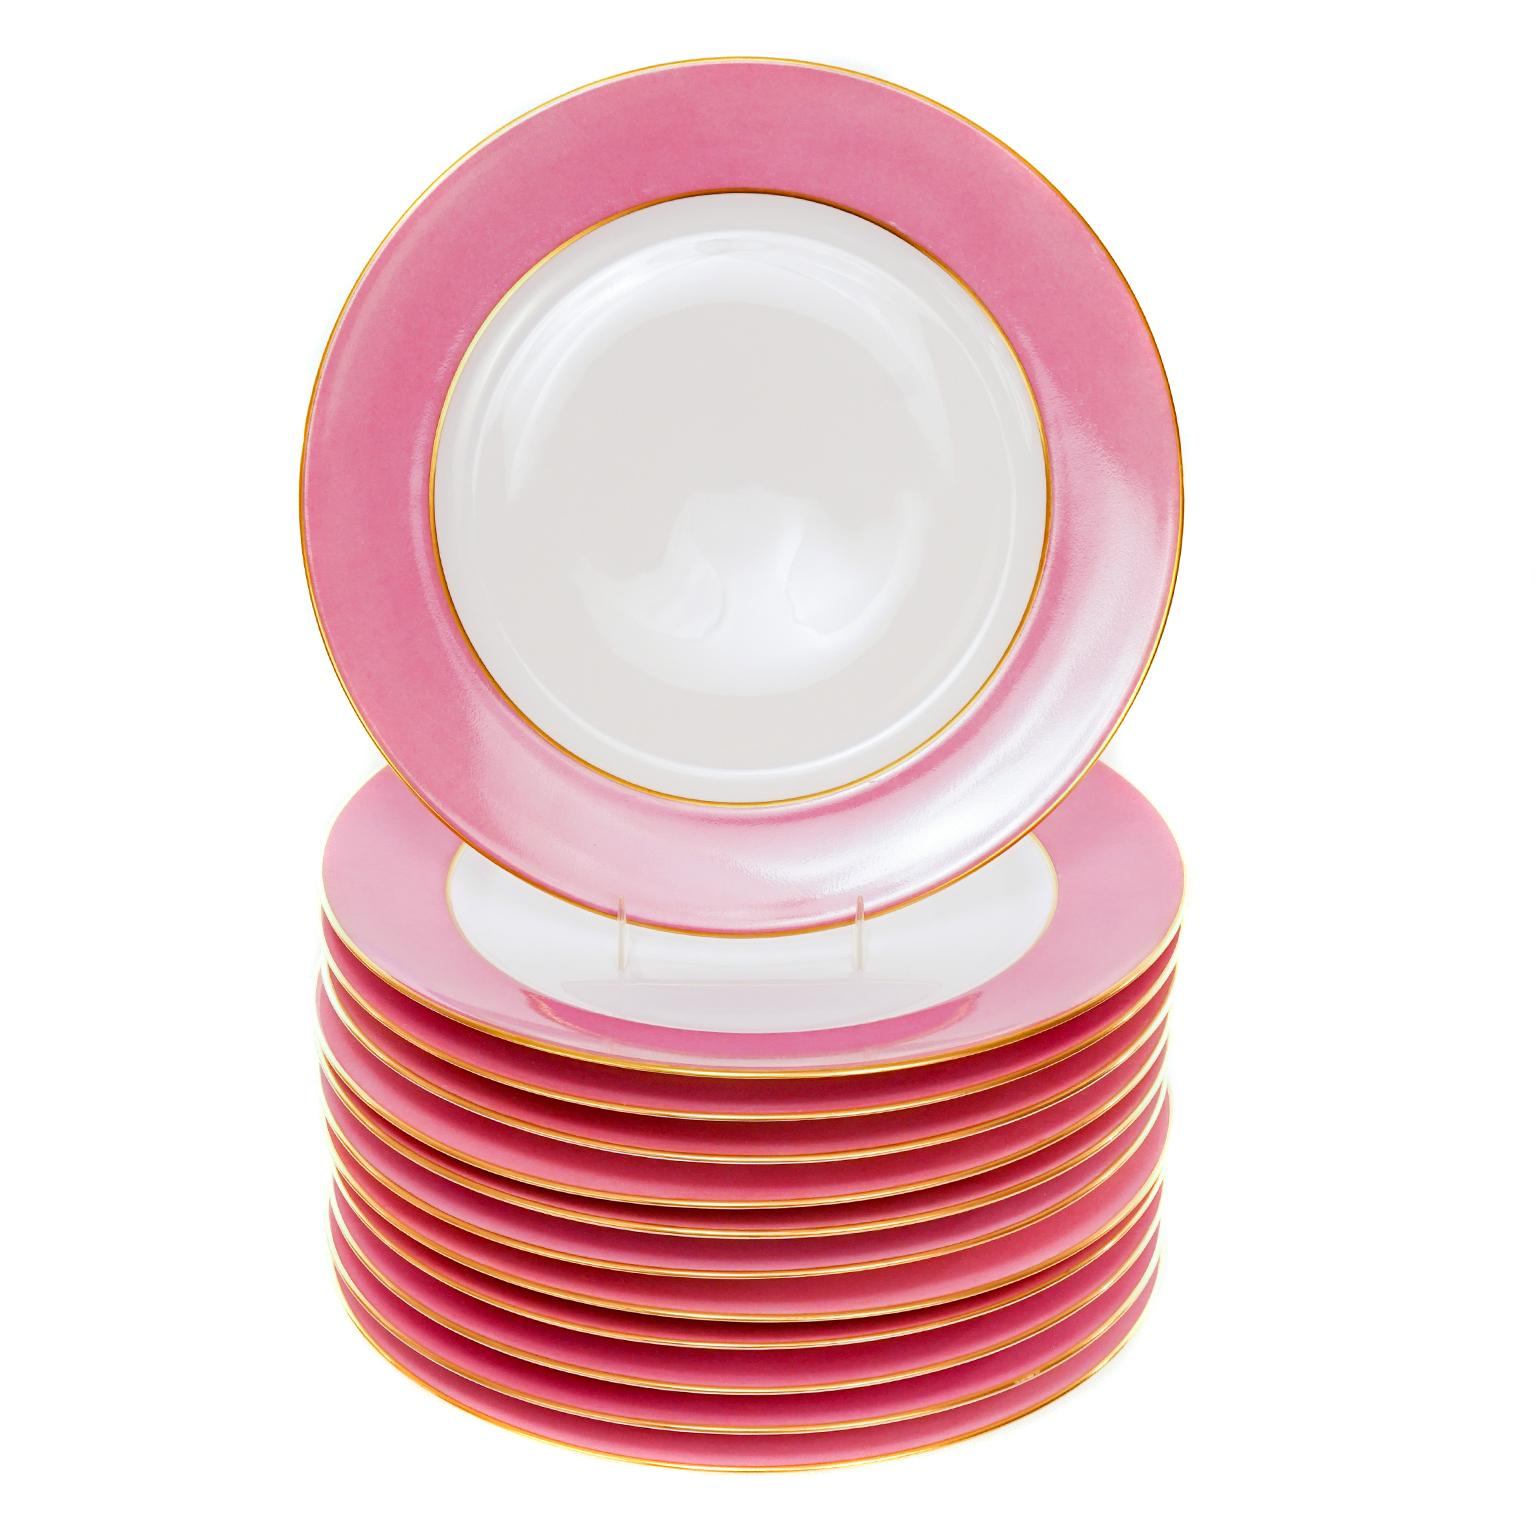 French Thomas Goode & Co. Pink Banded Chargers Limoges, France